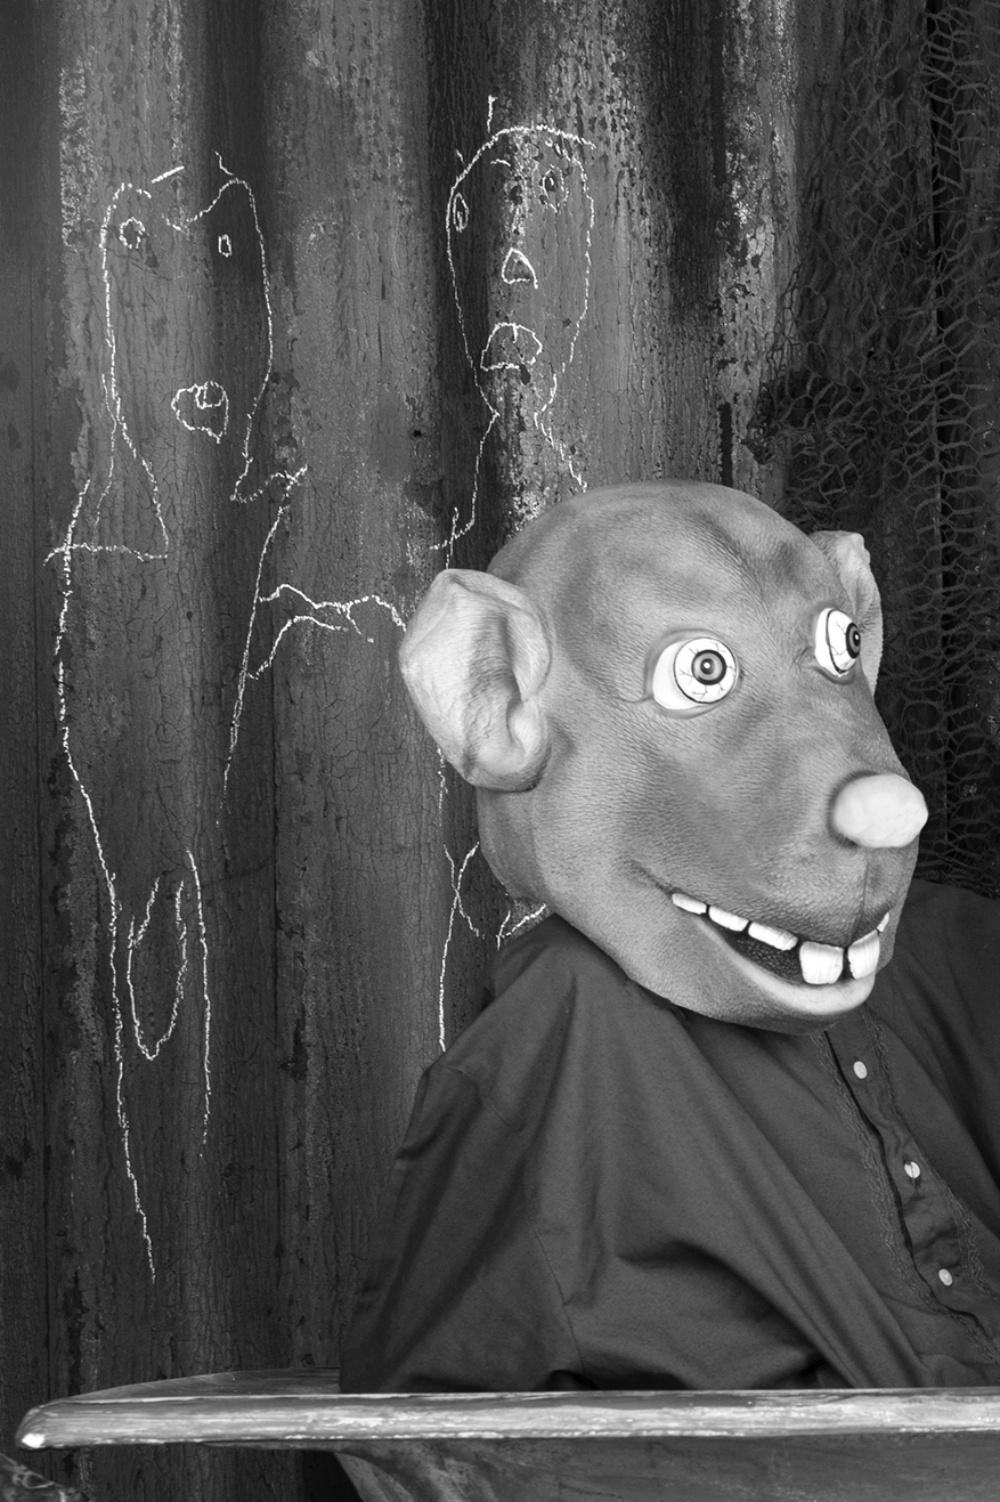 Roger BALLEN (*1950, America/South Africa)
Jackpot, 2016
Archival pigment print
43 x 61 cm (16 7/8 x 24 in.)
Edition of 9, plus 2 AP; Ed. no. 2/9
Print only

– Roger the Rat

Surreal, refined, disturbing: Roger Ballen has made a name for himself